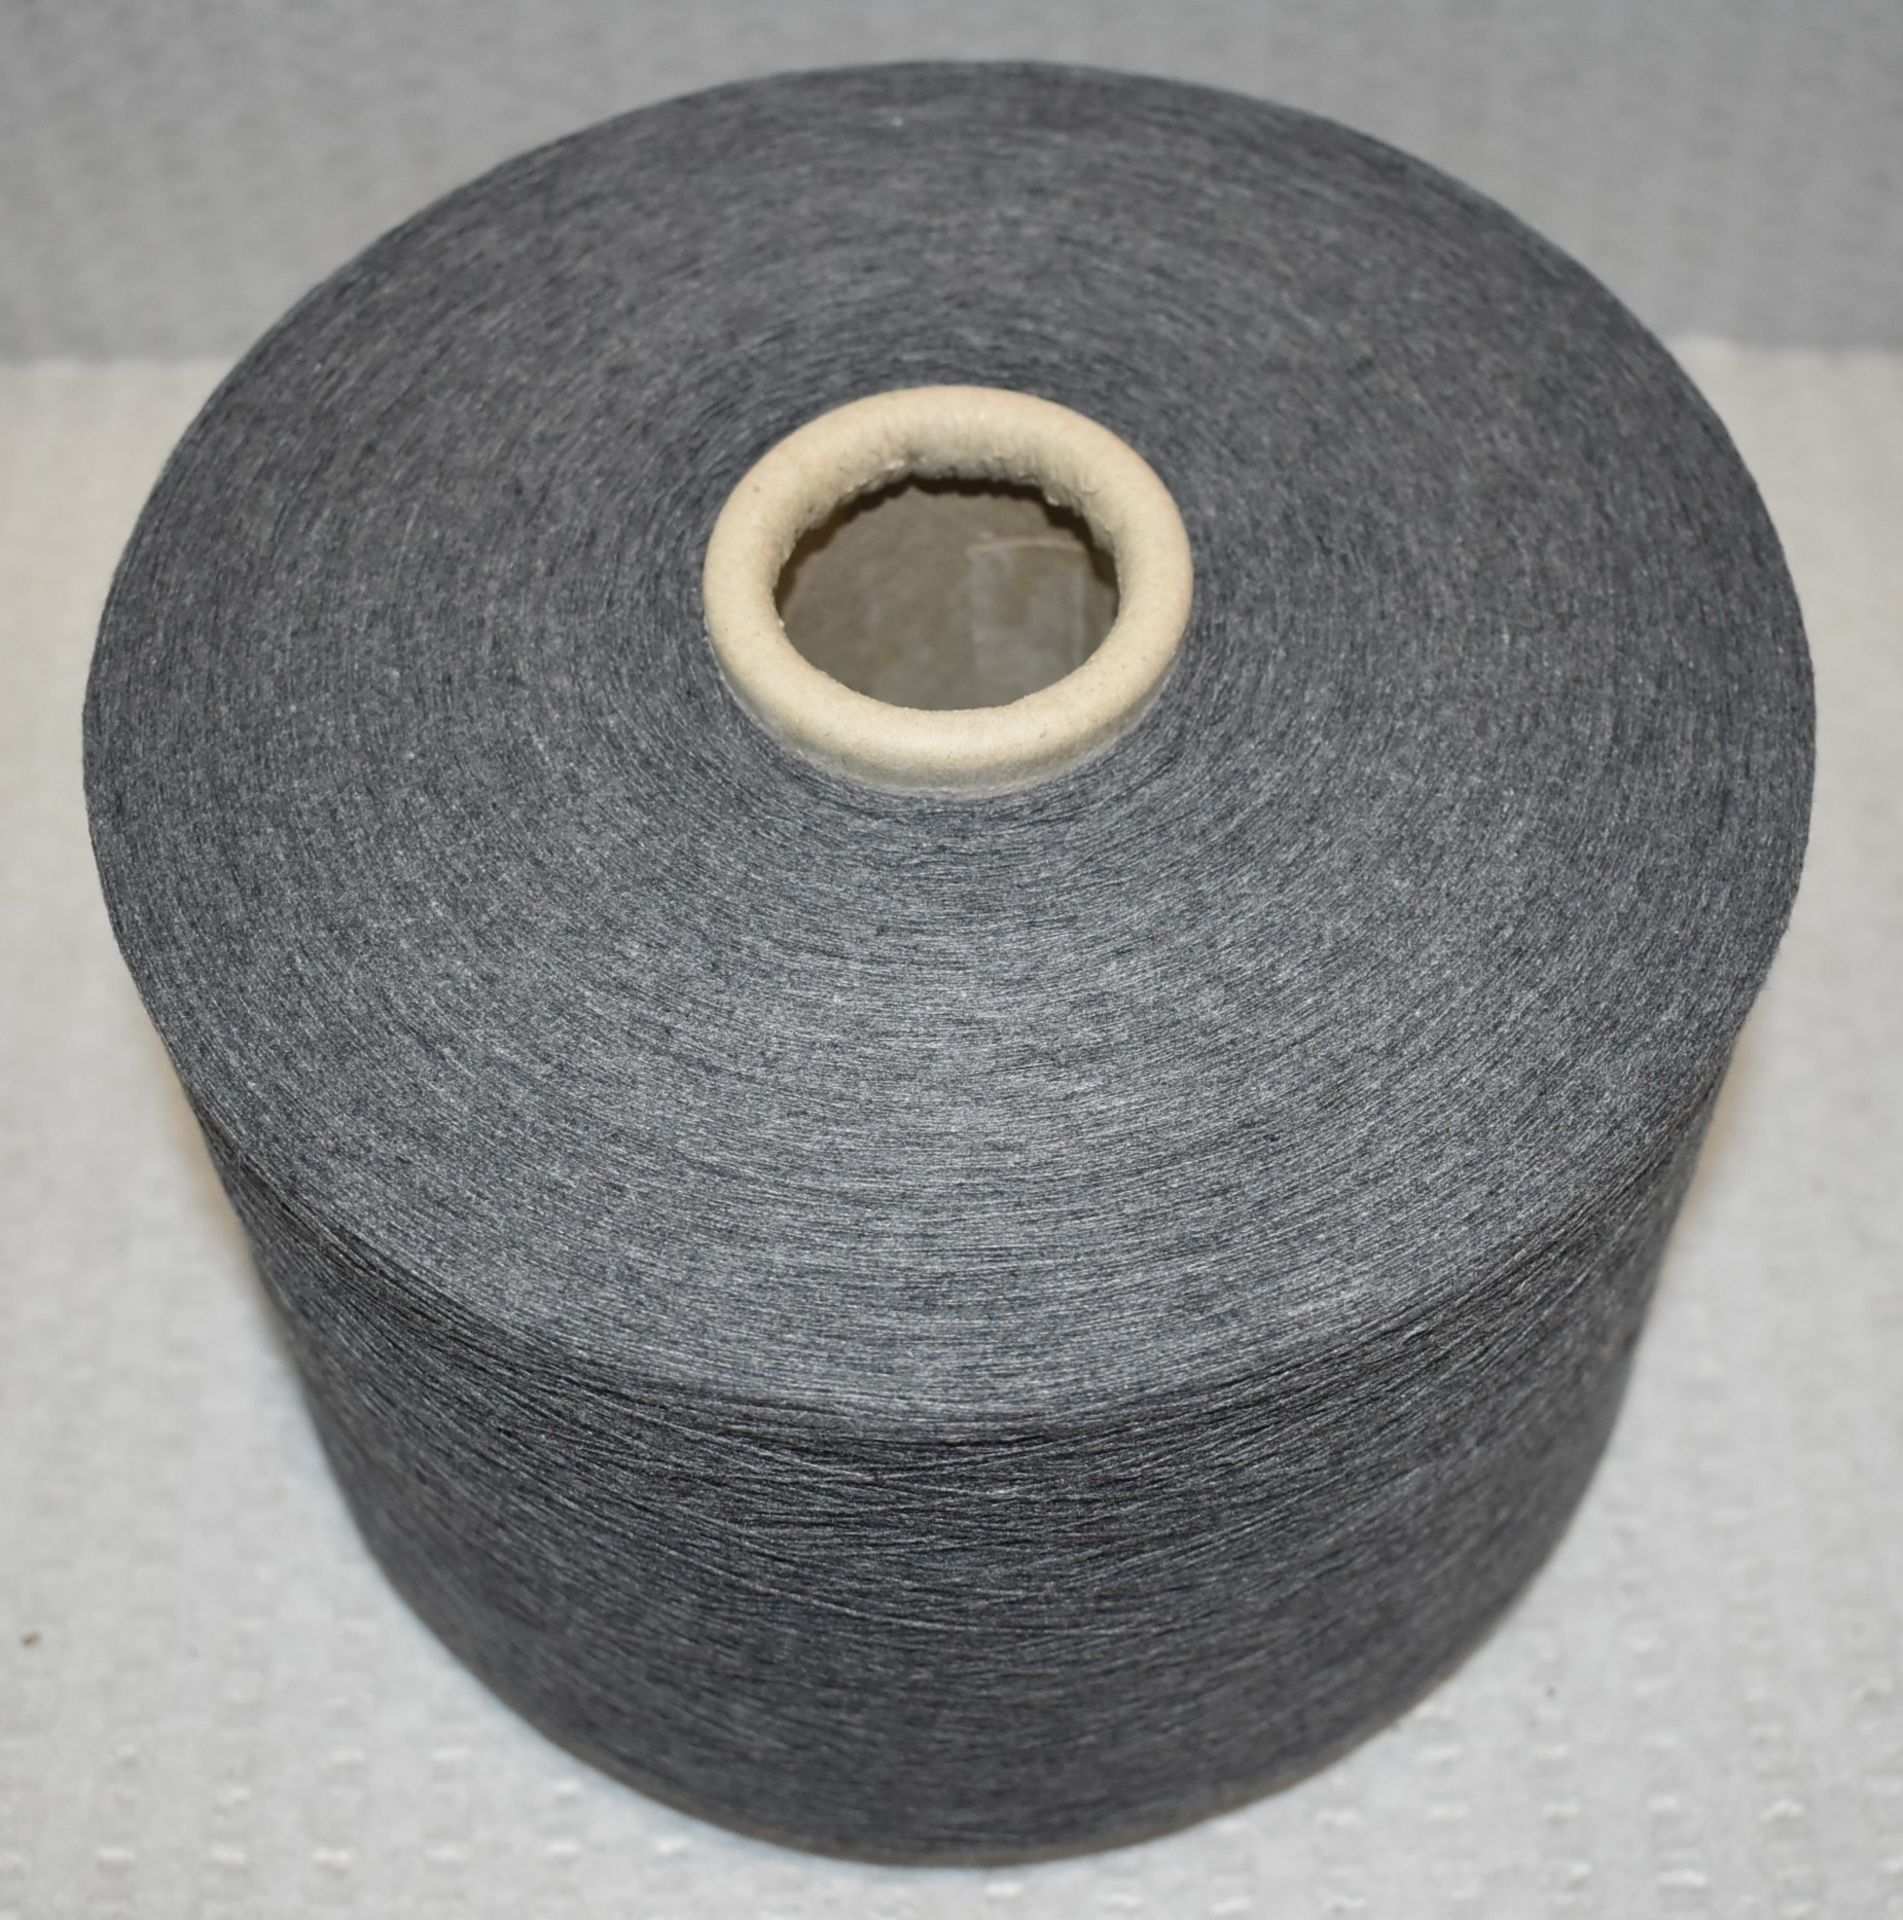 1 x Cone of 1/13 MicroCotton Knitting Yarn - Mid Grey - Approx Weight: 2,500g - New Stock ABL Yarn - Image 5 of 18